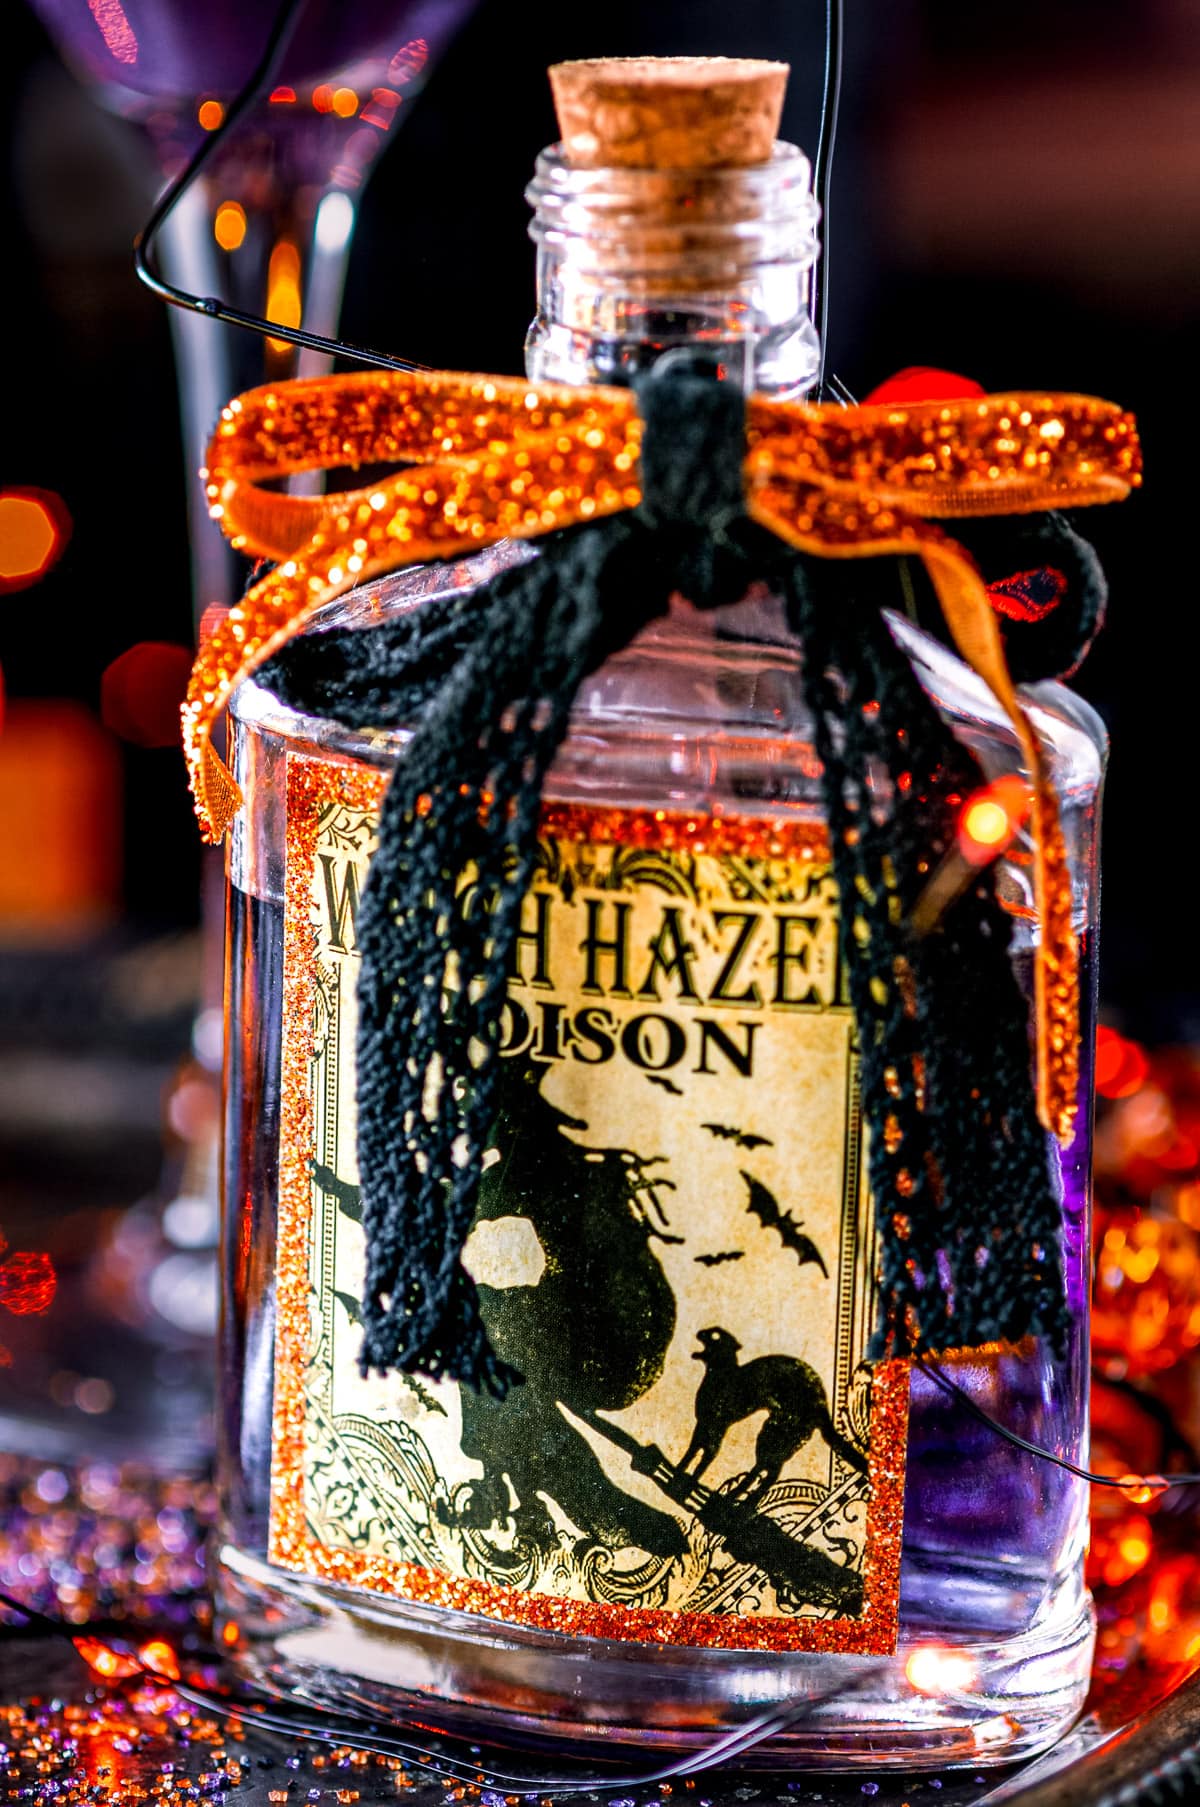 Halloween Hocus Pocus Cocktail in witch hazel poison bottle with candles in background